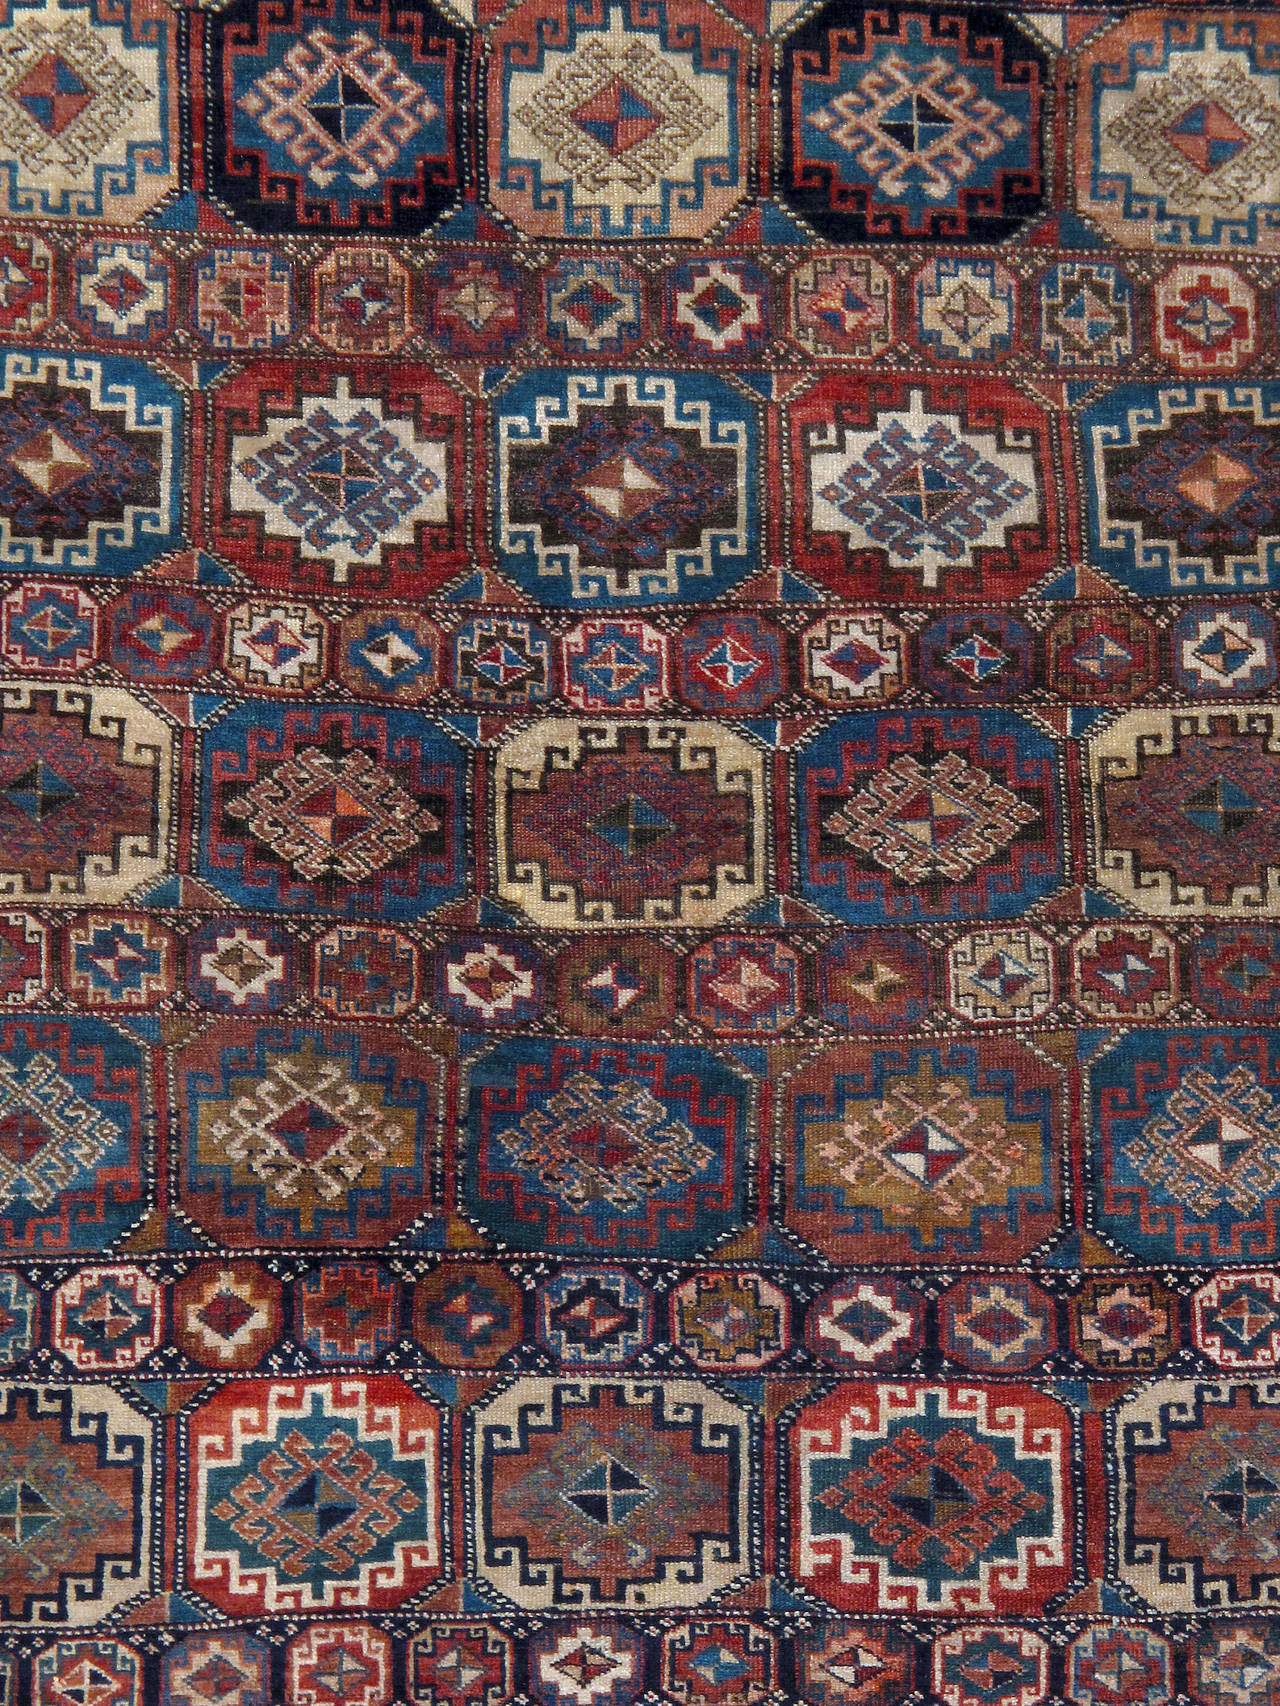 An antique North West Persian carpet from the first quarter of the 20th century.